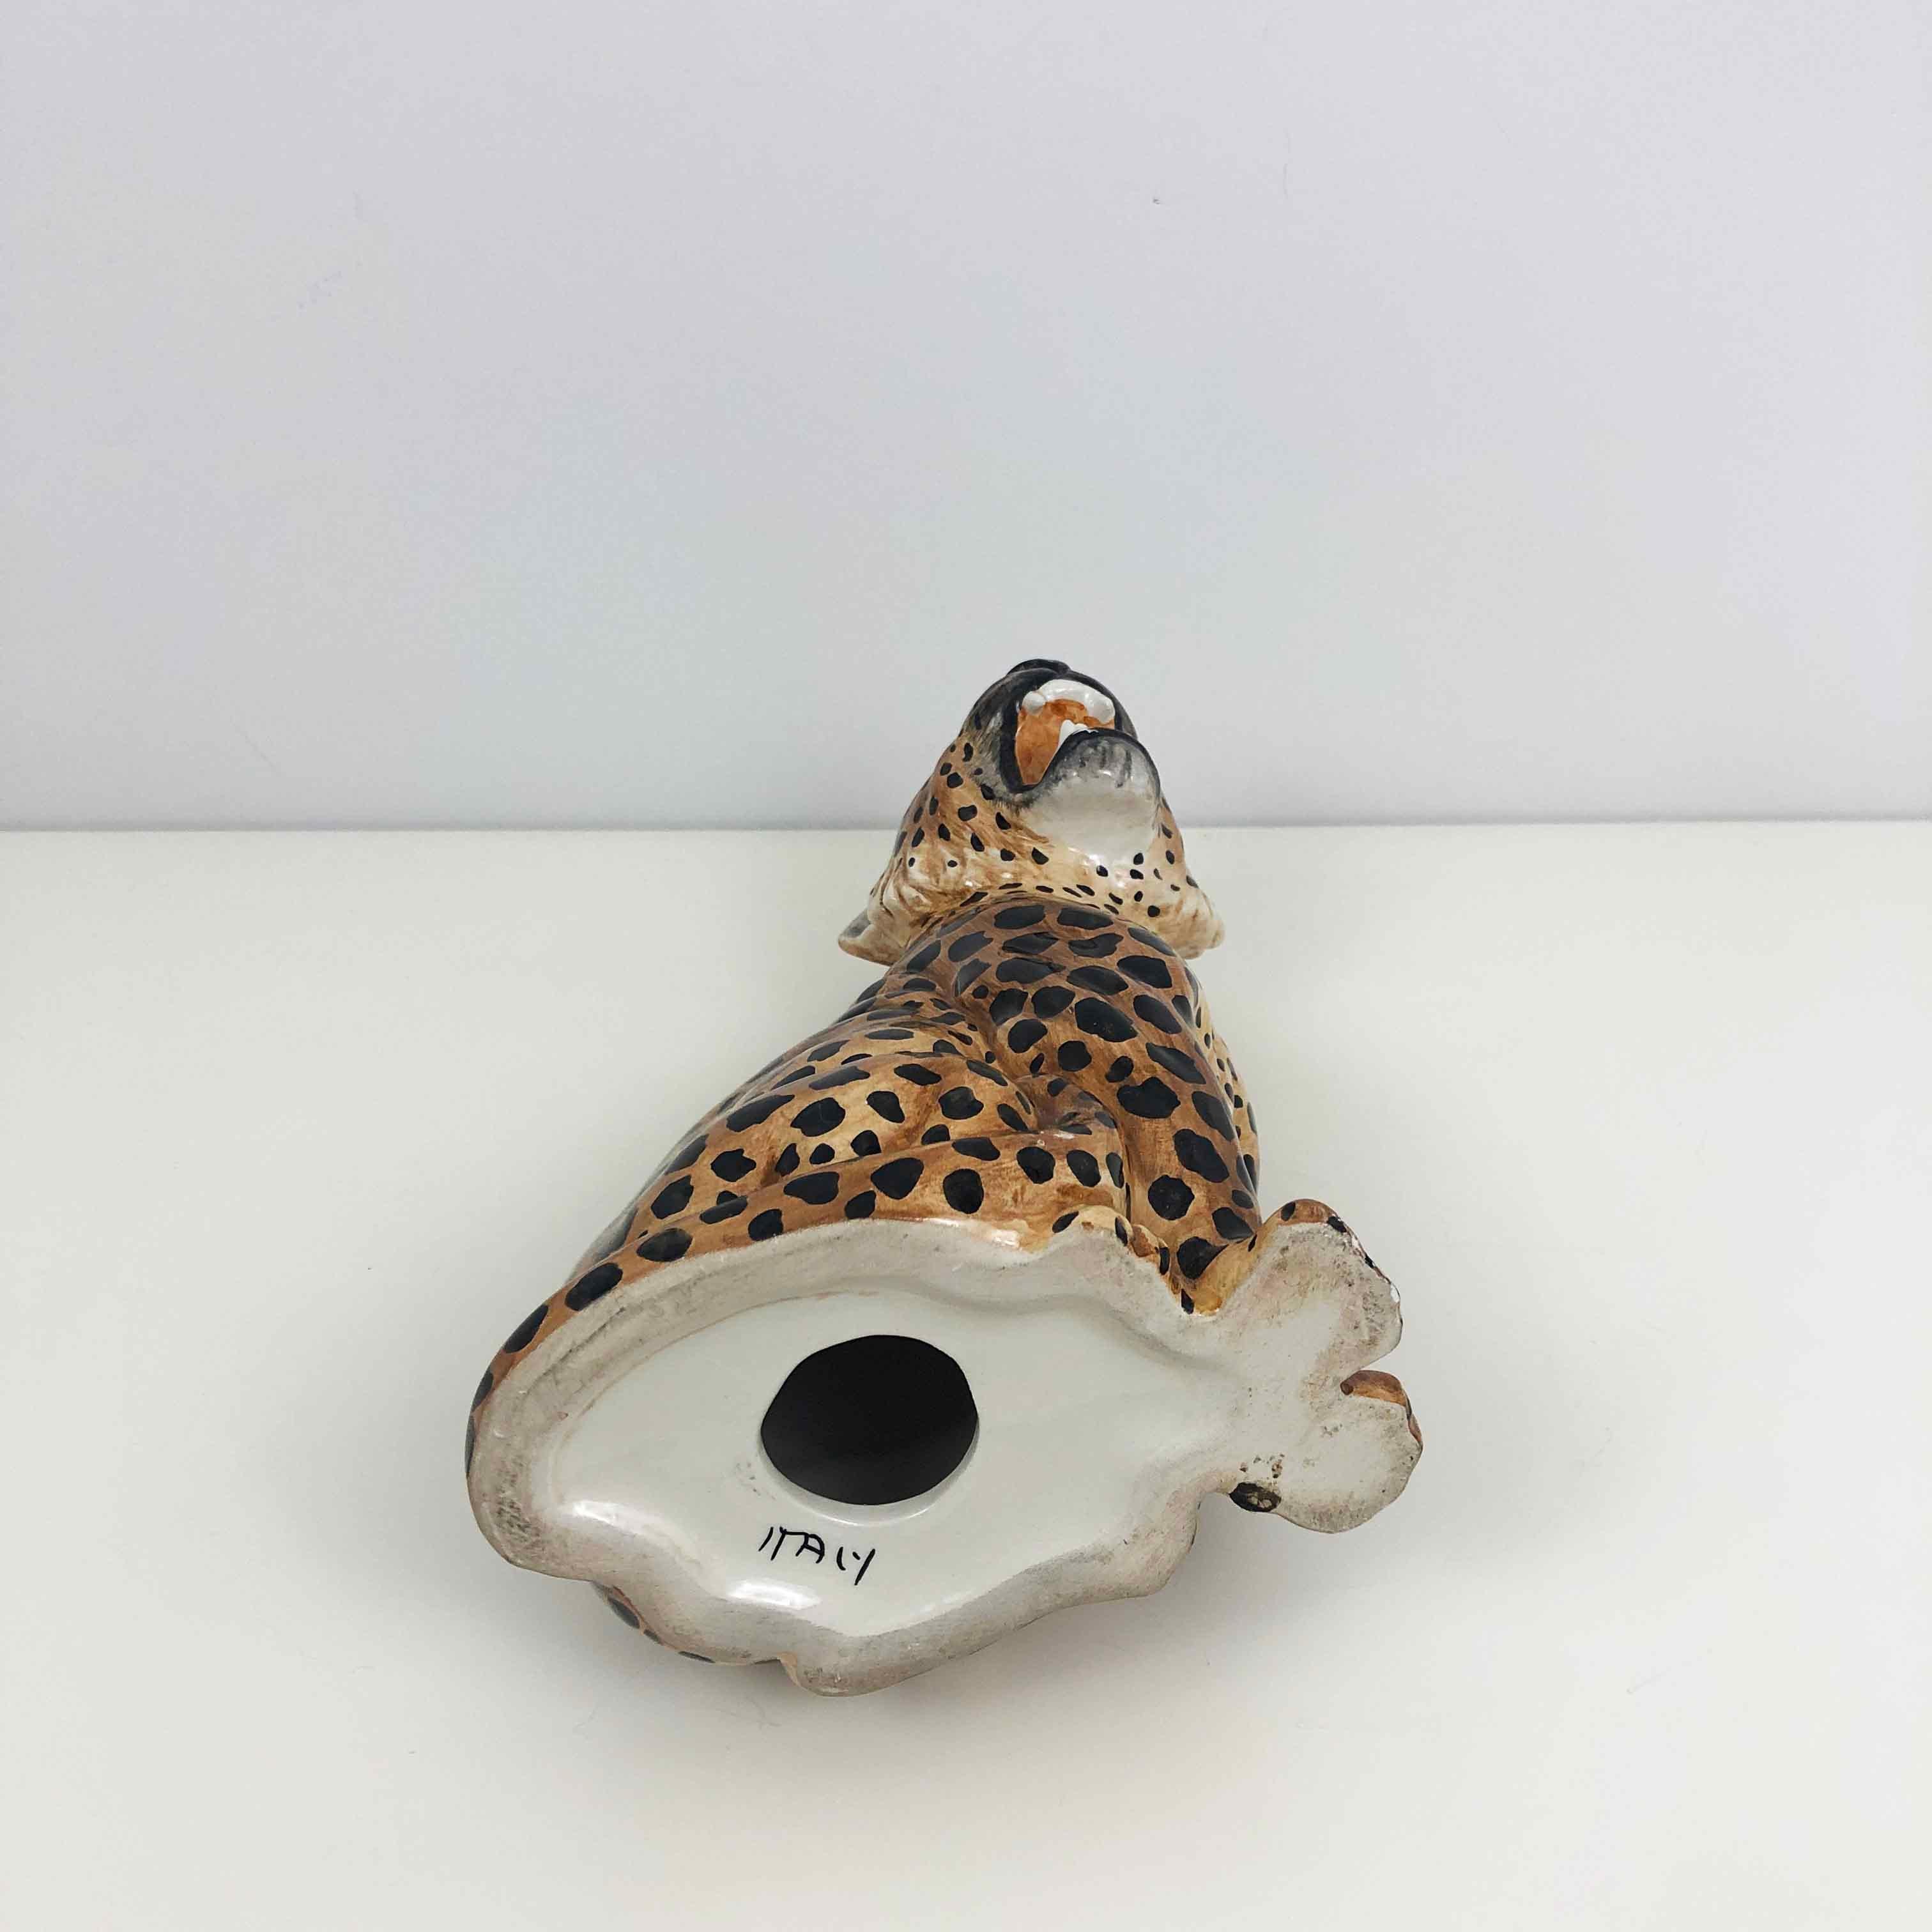 Beautiful hand-painted vintage leopard in ceramic. This figurine was made in Italy.

Italy, 1950s

Designer/Manufacturer: Unknown 

In good vintage condition. There are some small chips from the glaze, this is clearly visible in the